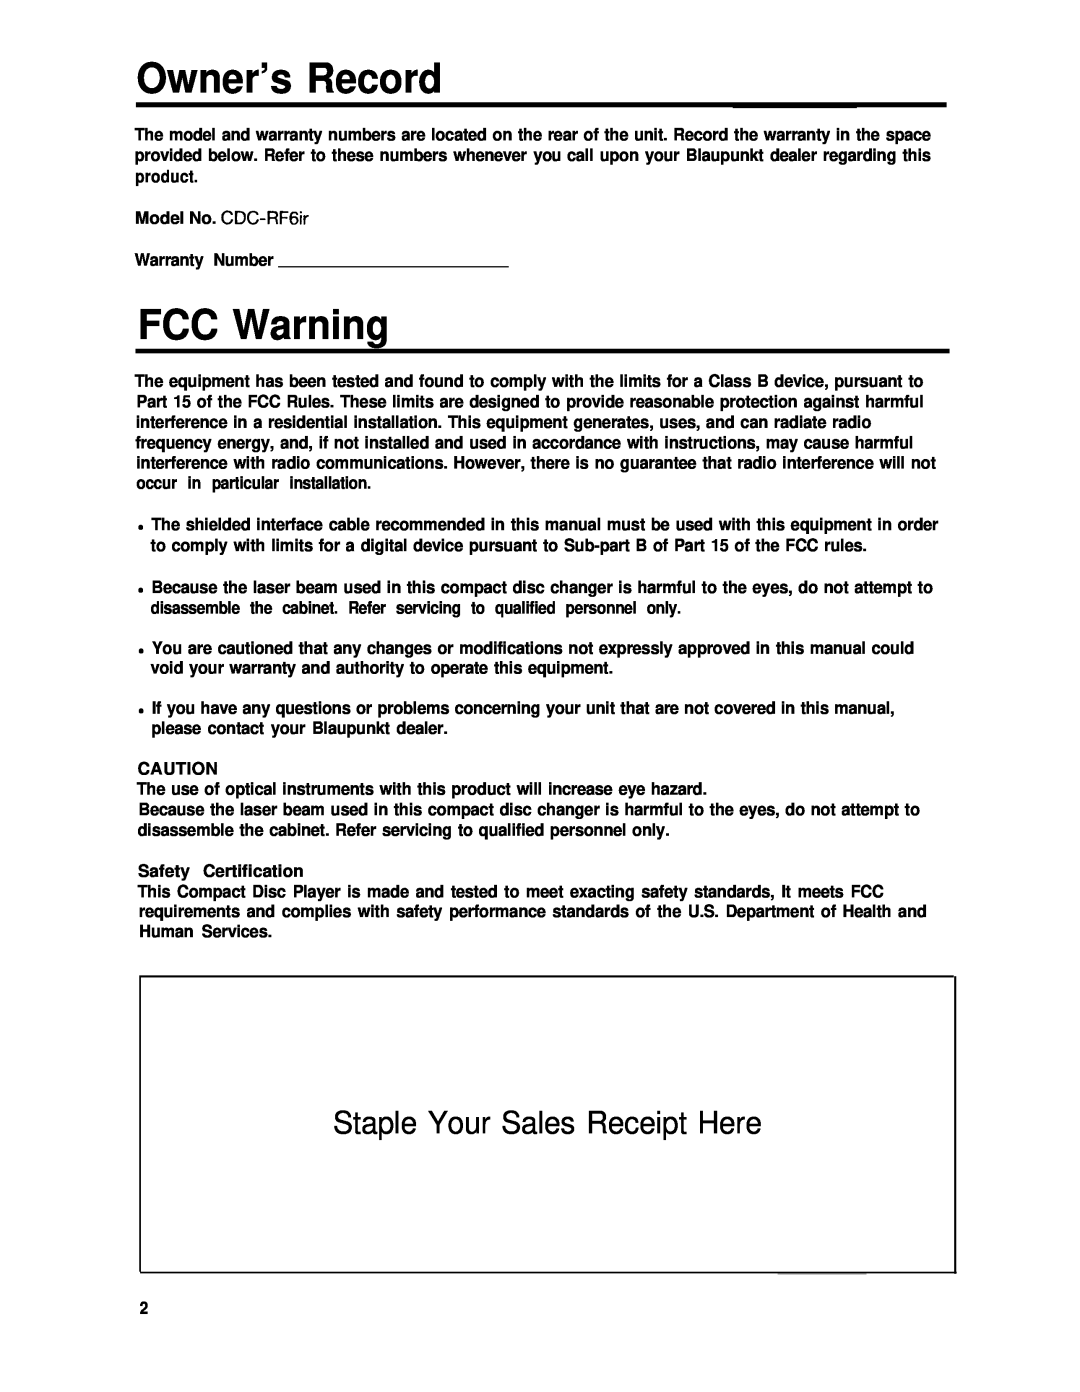 Blaupunkt CDC-RF6IR manual Owner’s Record, FCC Warning, Staple Your Sales Receipt Here 